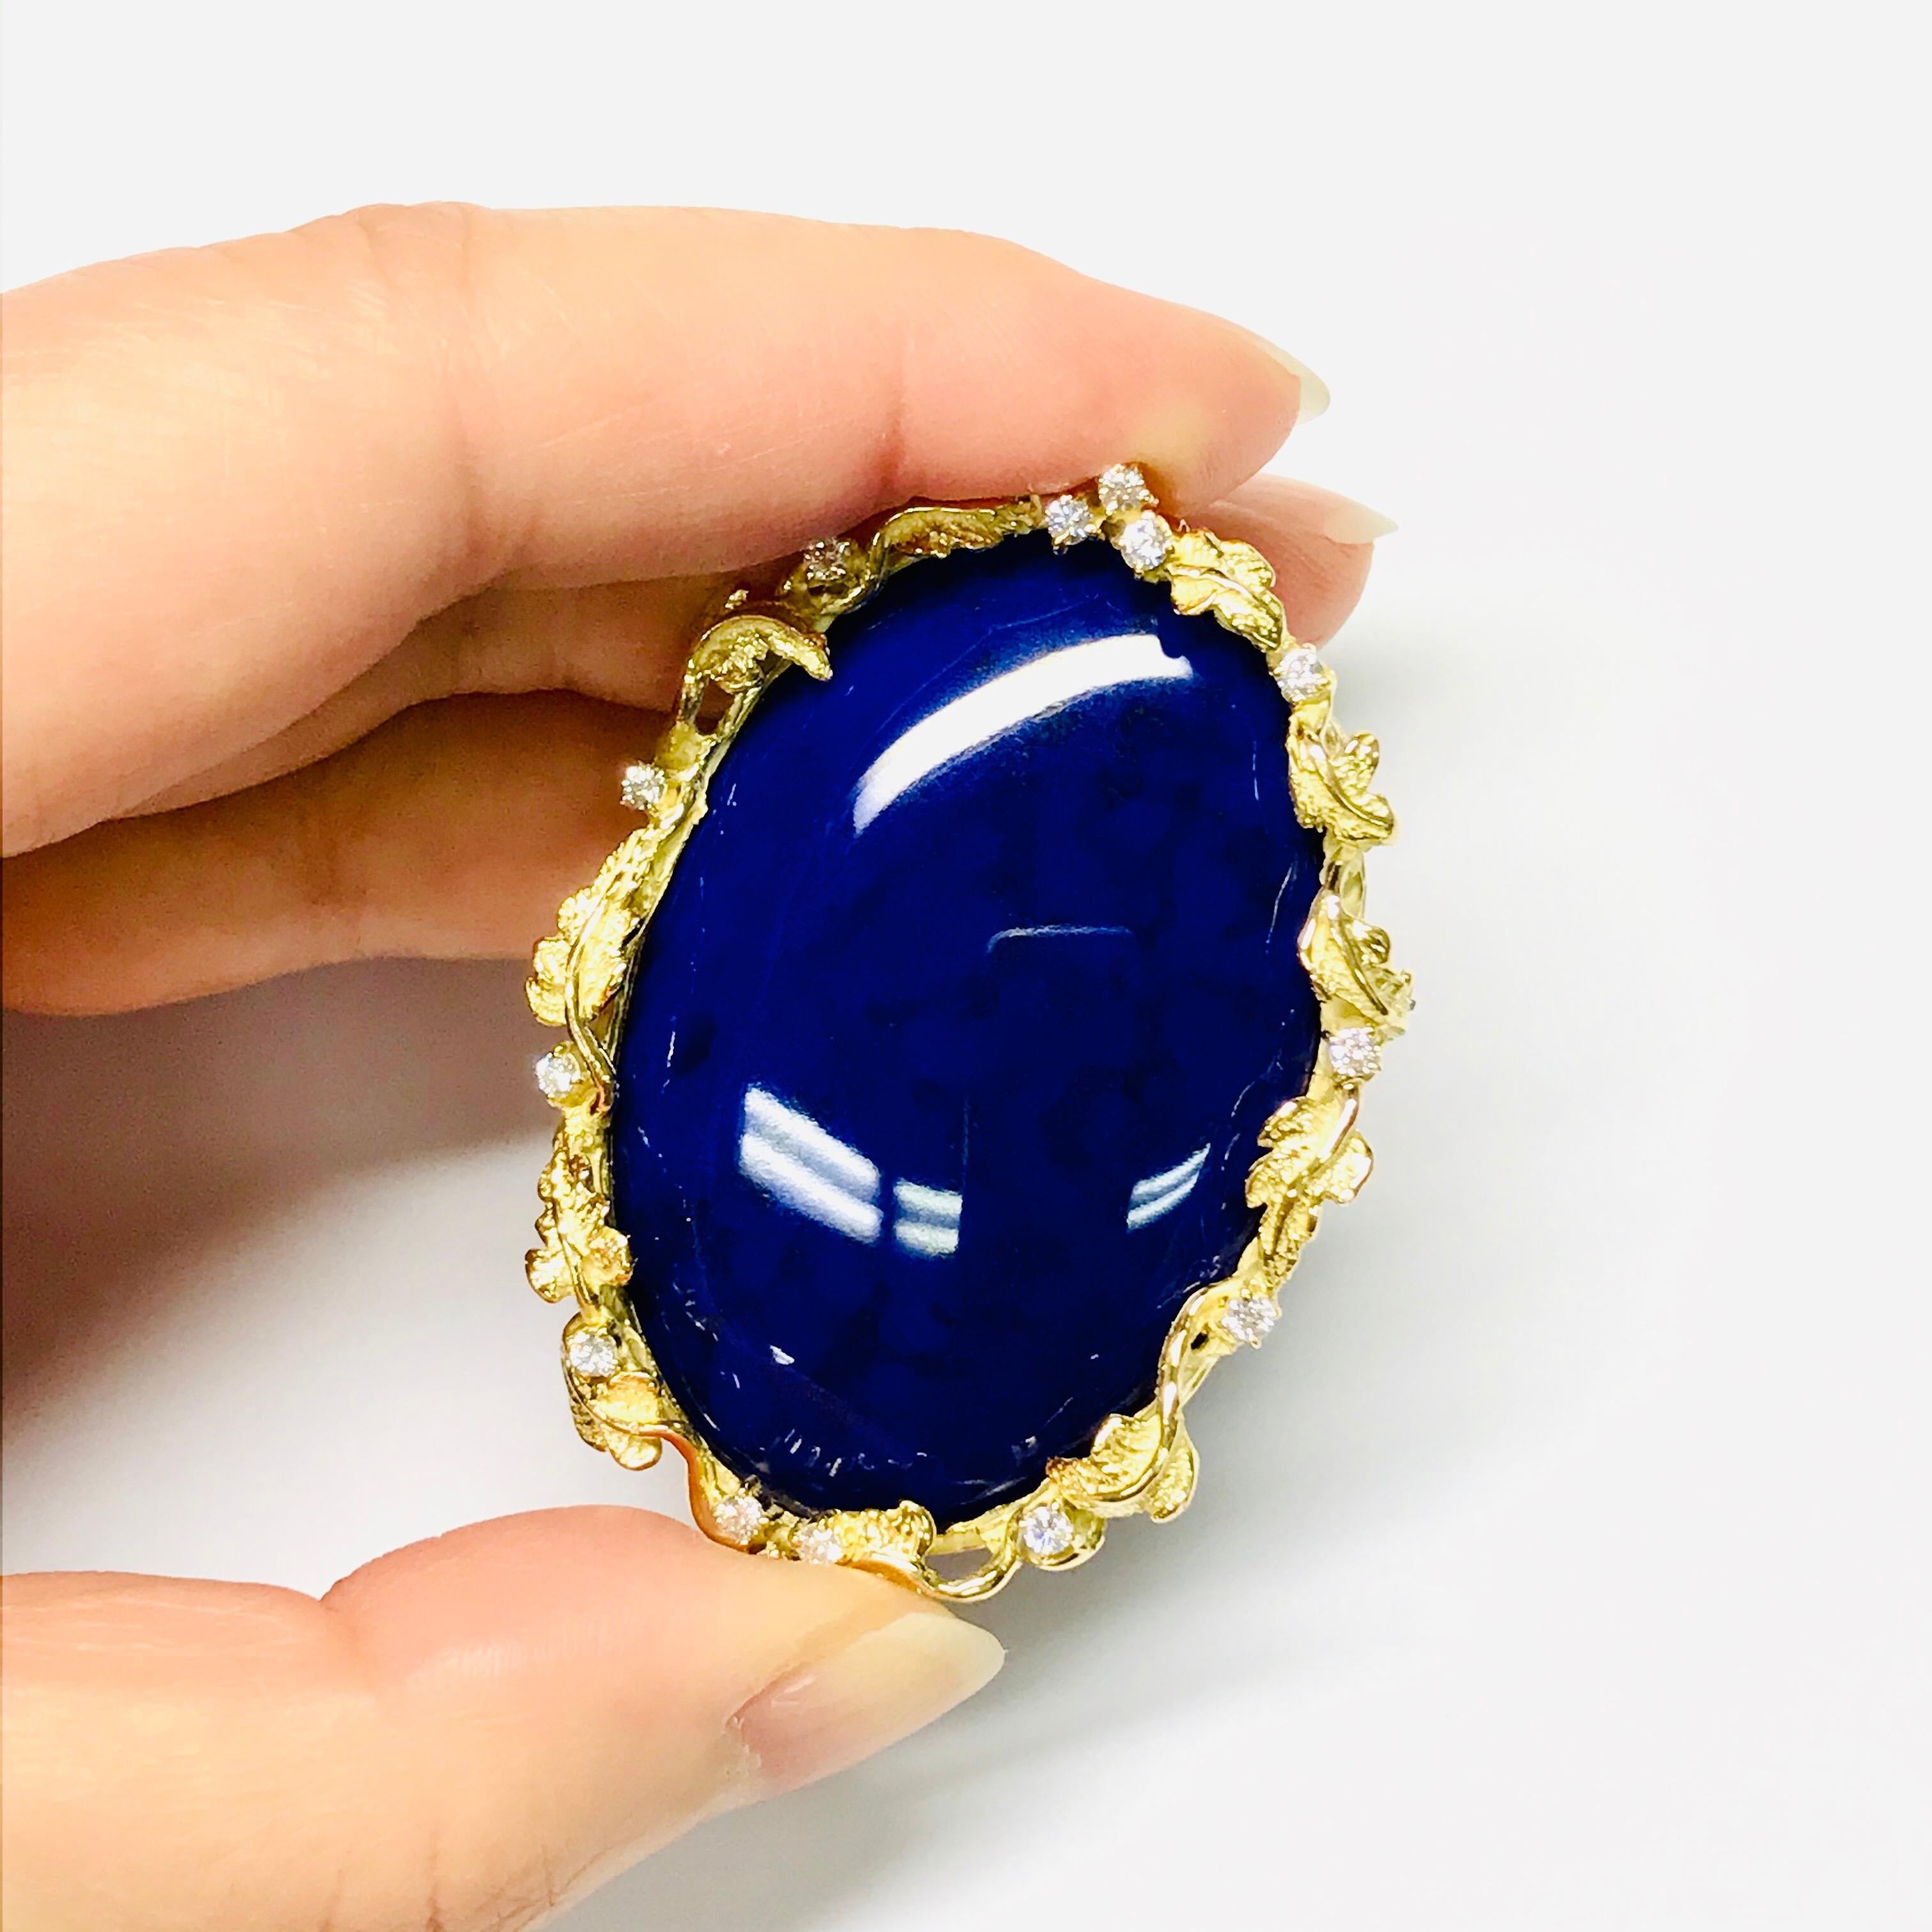 [LIMITED SPECIAL OFFER : Lapis Collection]

The list price includes the Japanese Sales Tax.
All buyers outside of Japan will receive -10% tax exemption from the list price. 
Please inquire for details.

[Product Details]

K18YG
LPIS LAZULI